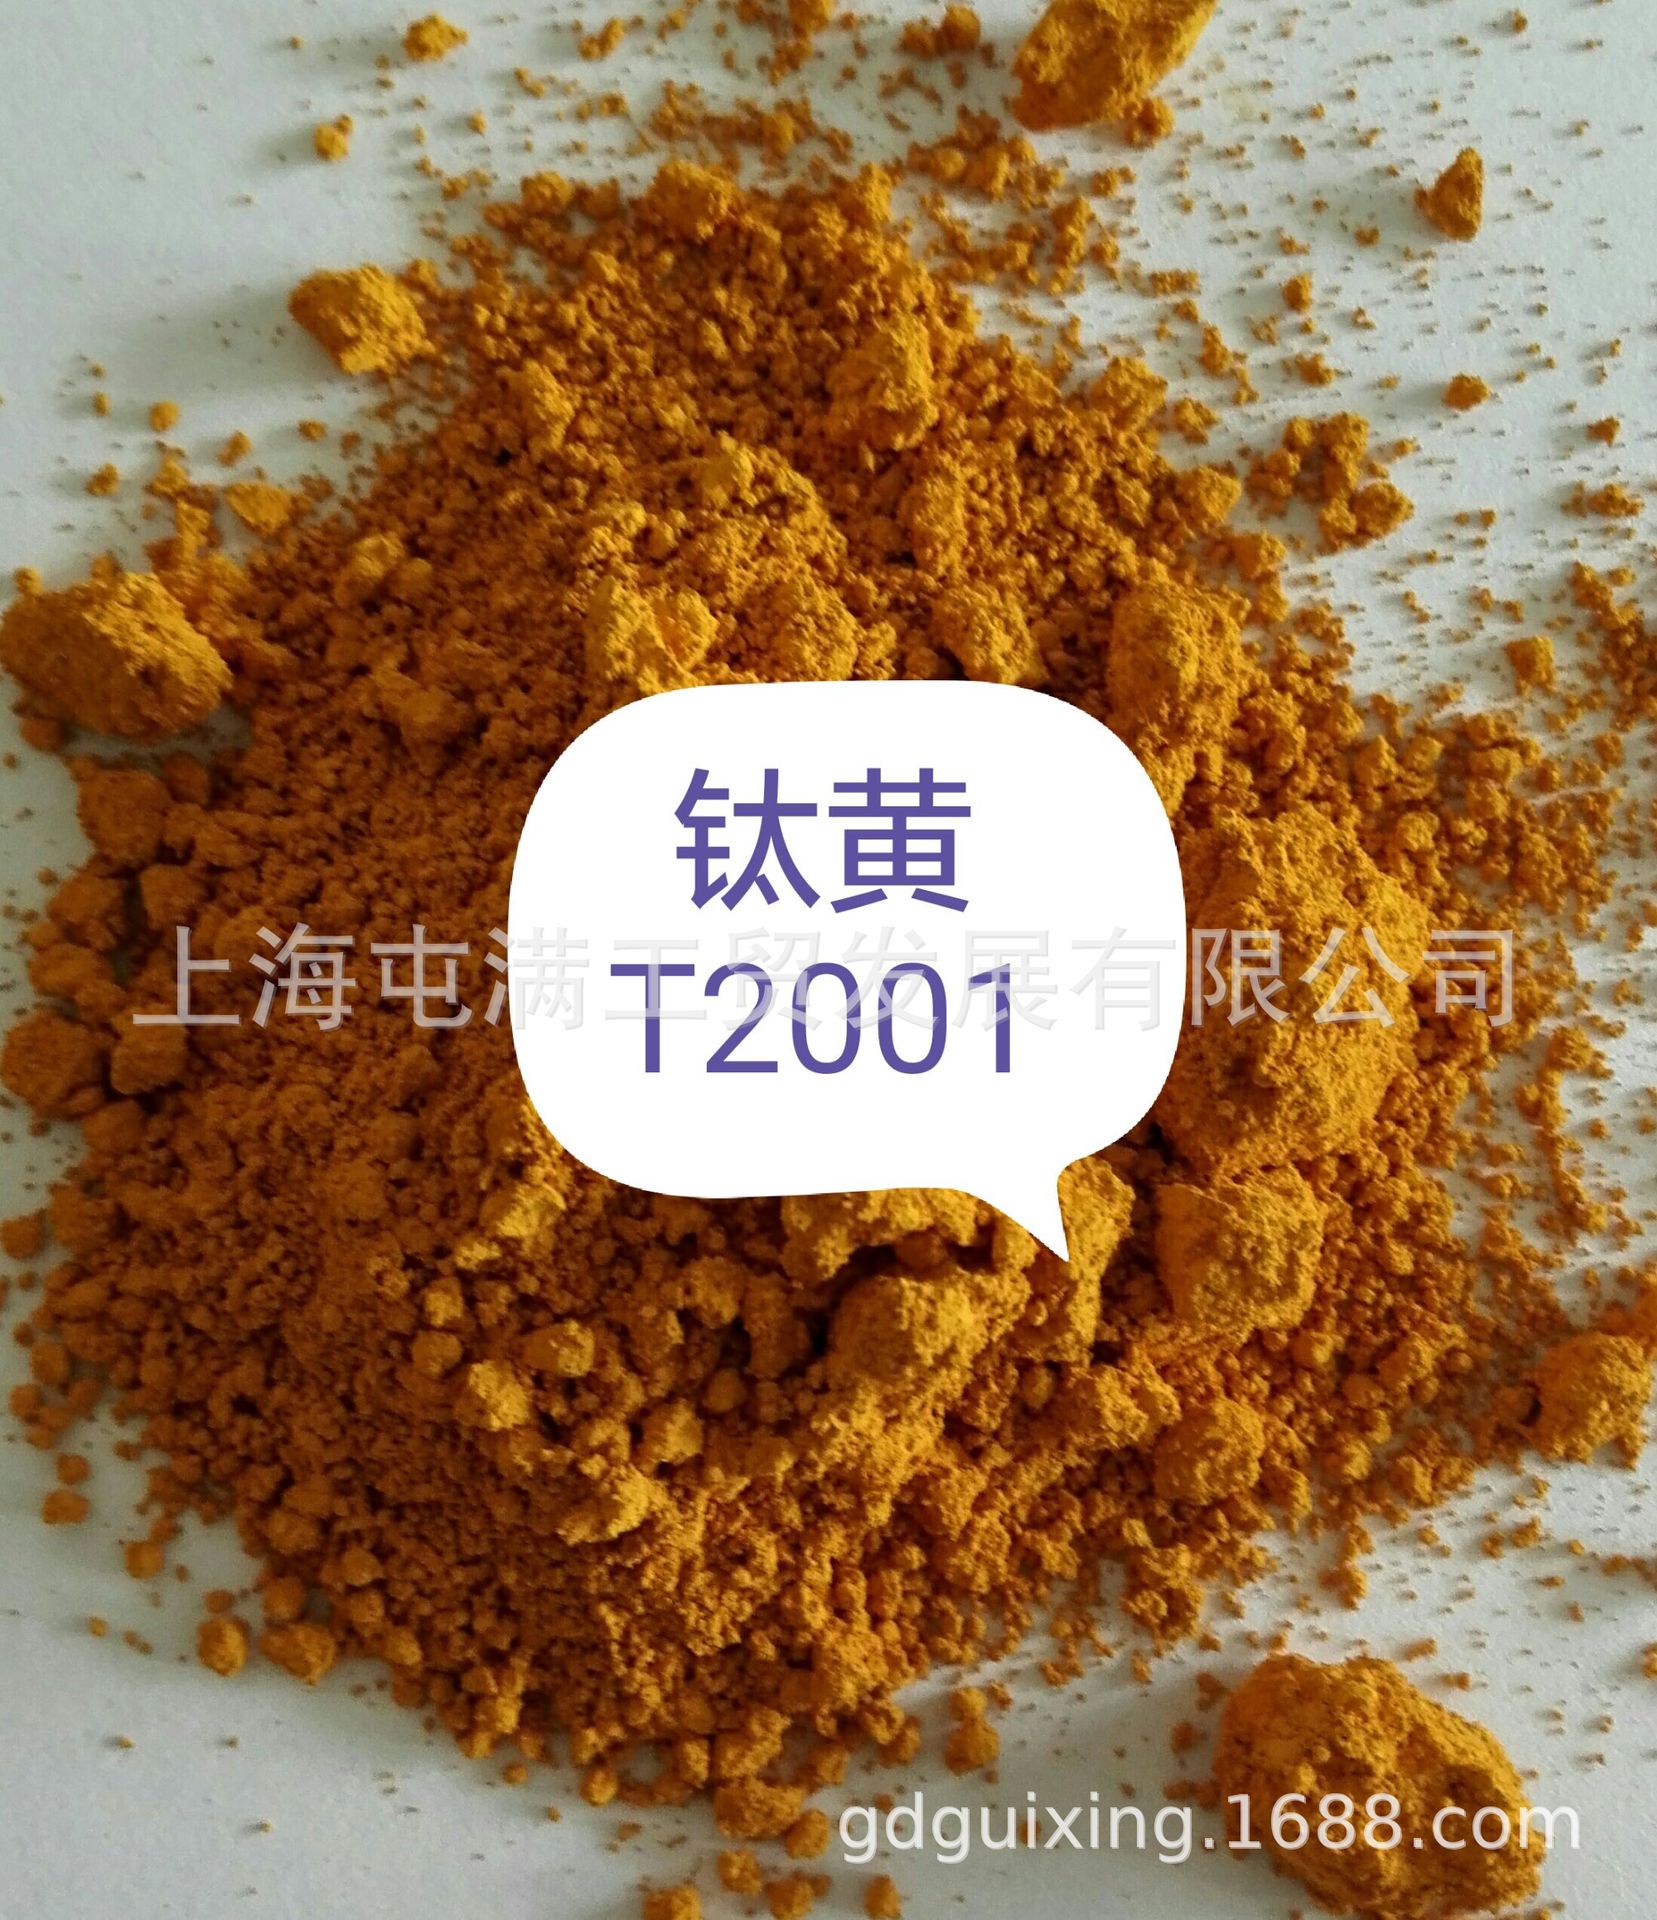 supply Imported environmental protection Pigment T2001 (Price advantage)